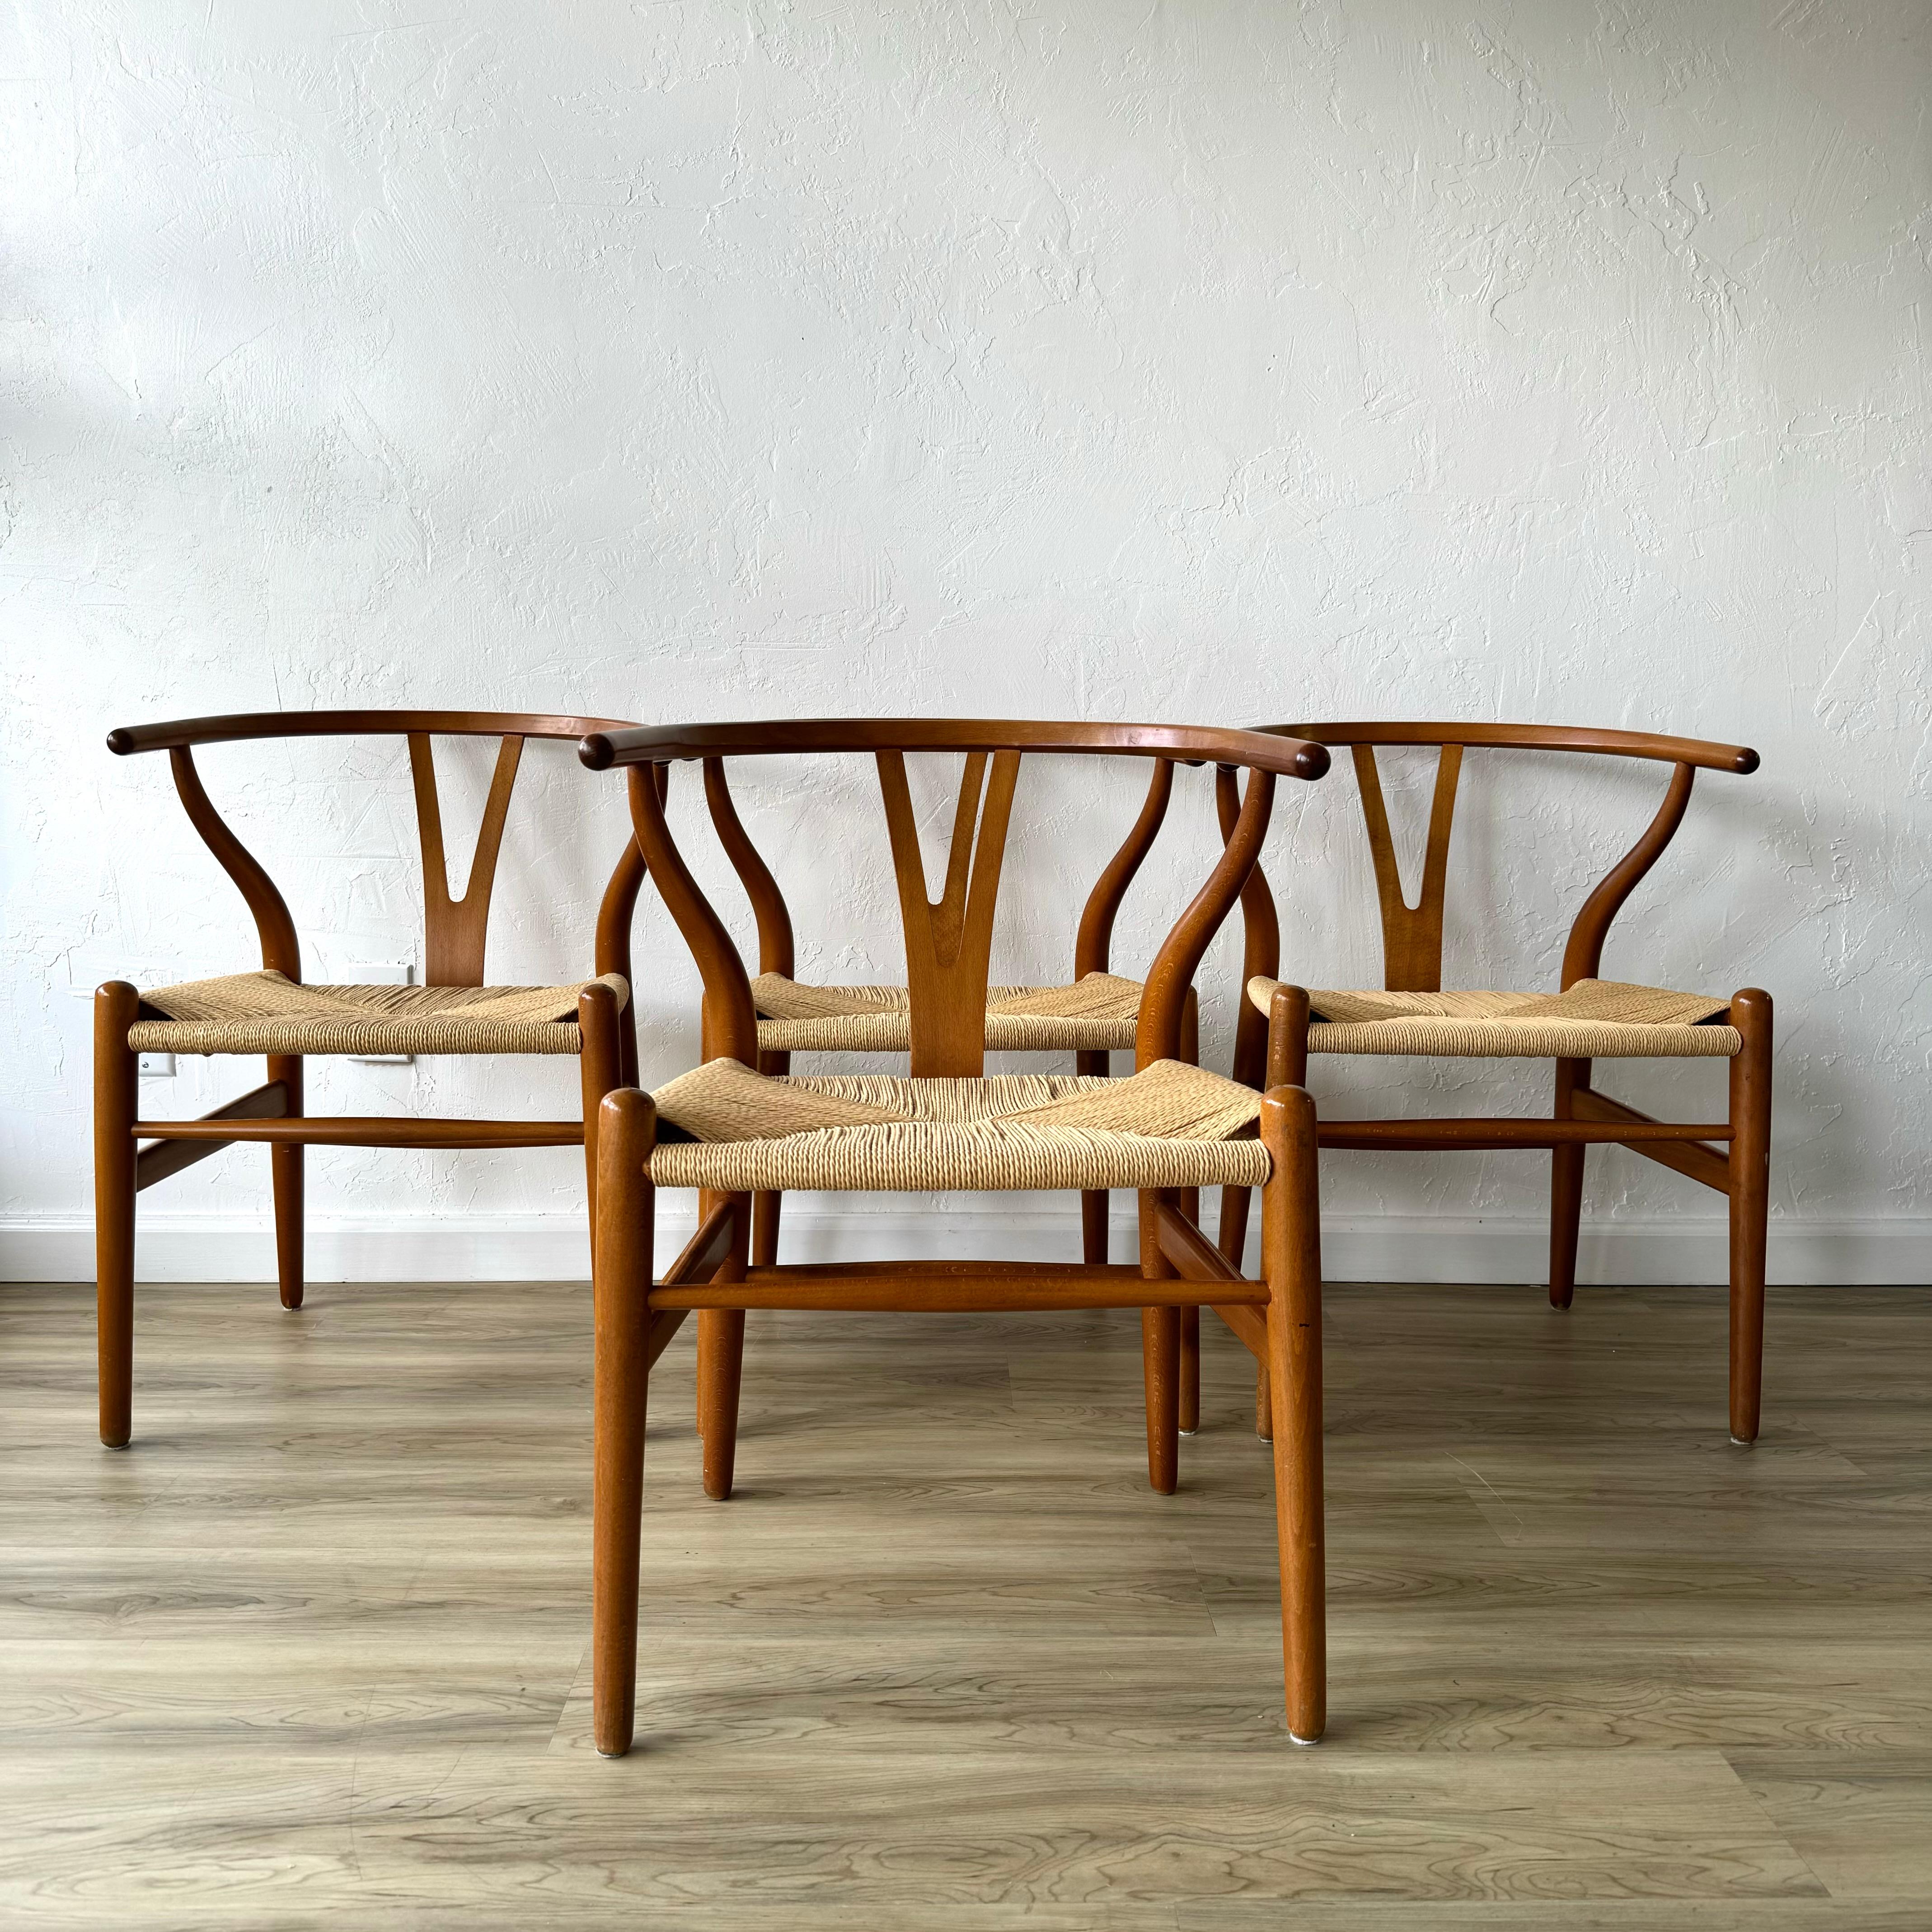 A fantastic set of 4 Hans Wegner designed wishbone chairs for Carl Hansen. These have been restored snd newly recorded with traditional danish papercord. These are made of beech wood and probably date to the 1970s.
